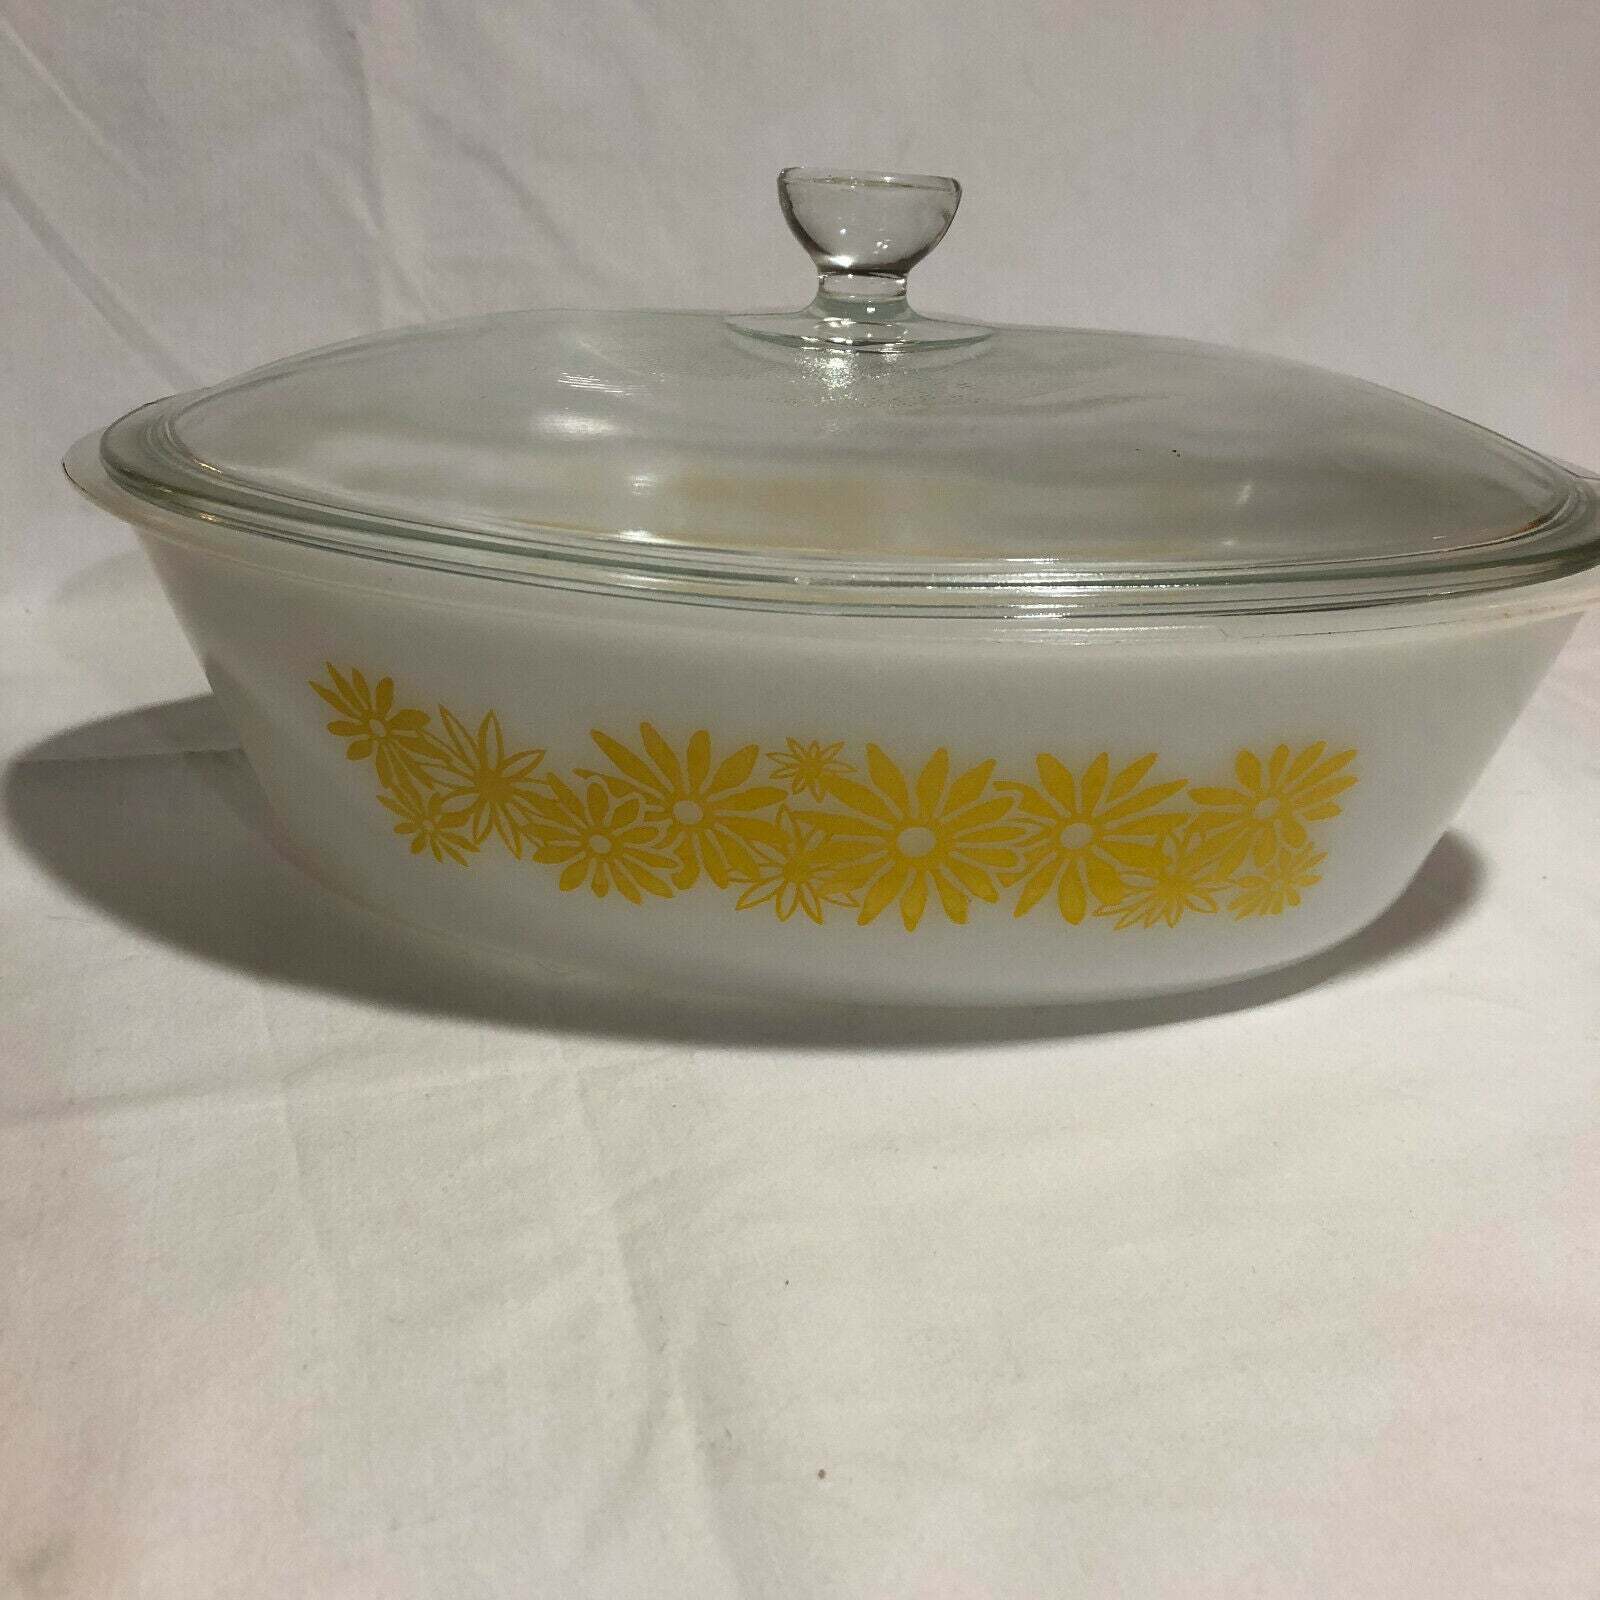 Vintage GLASBAKE Yellow Daisy Covered Oval Casserole Dish w/ Lid